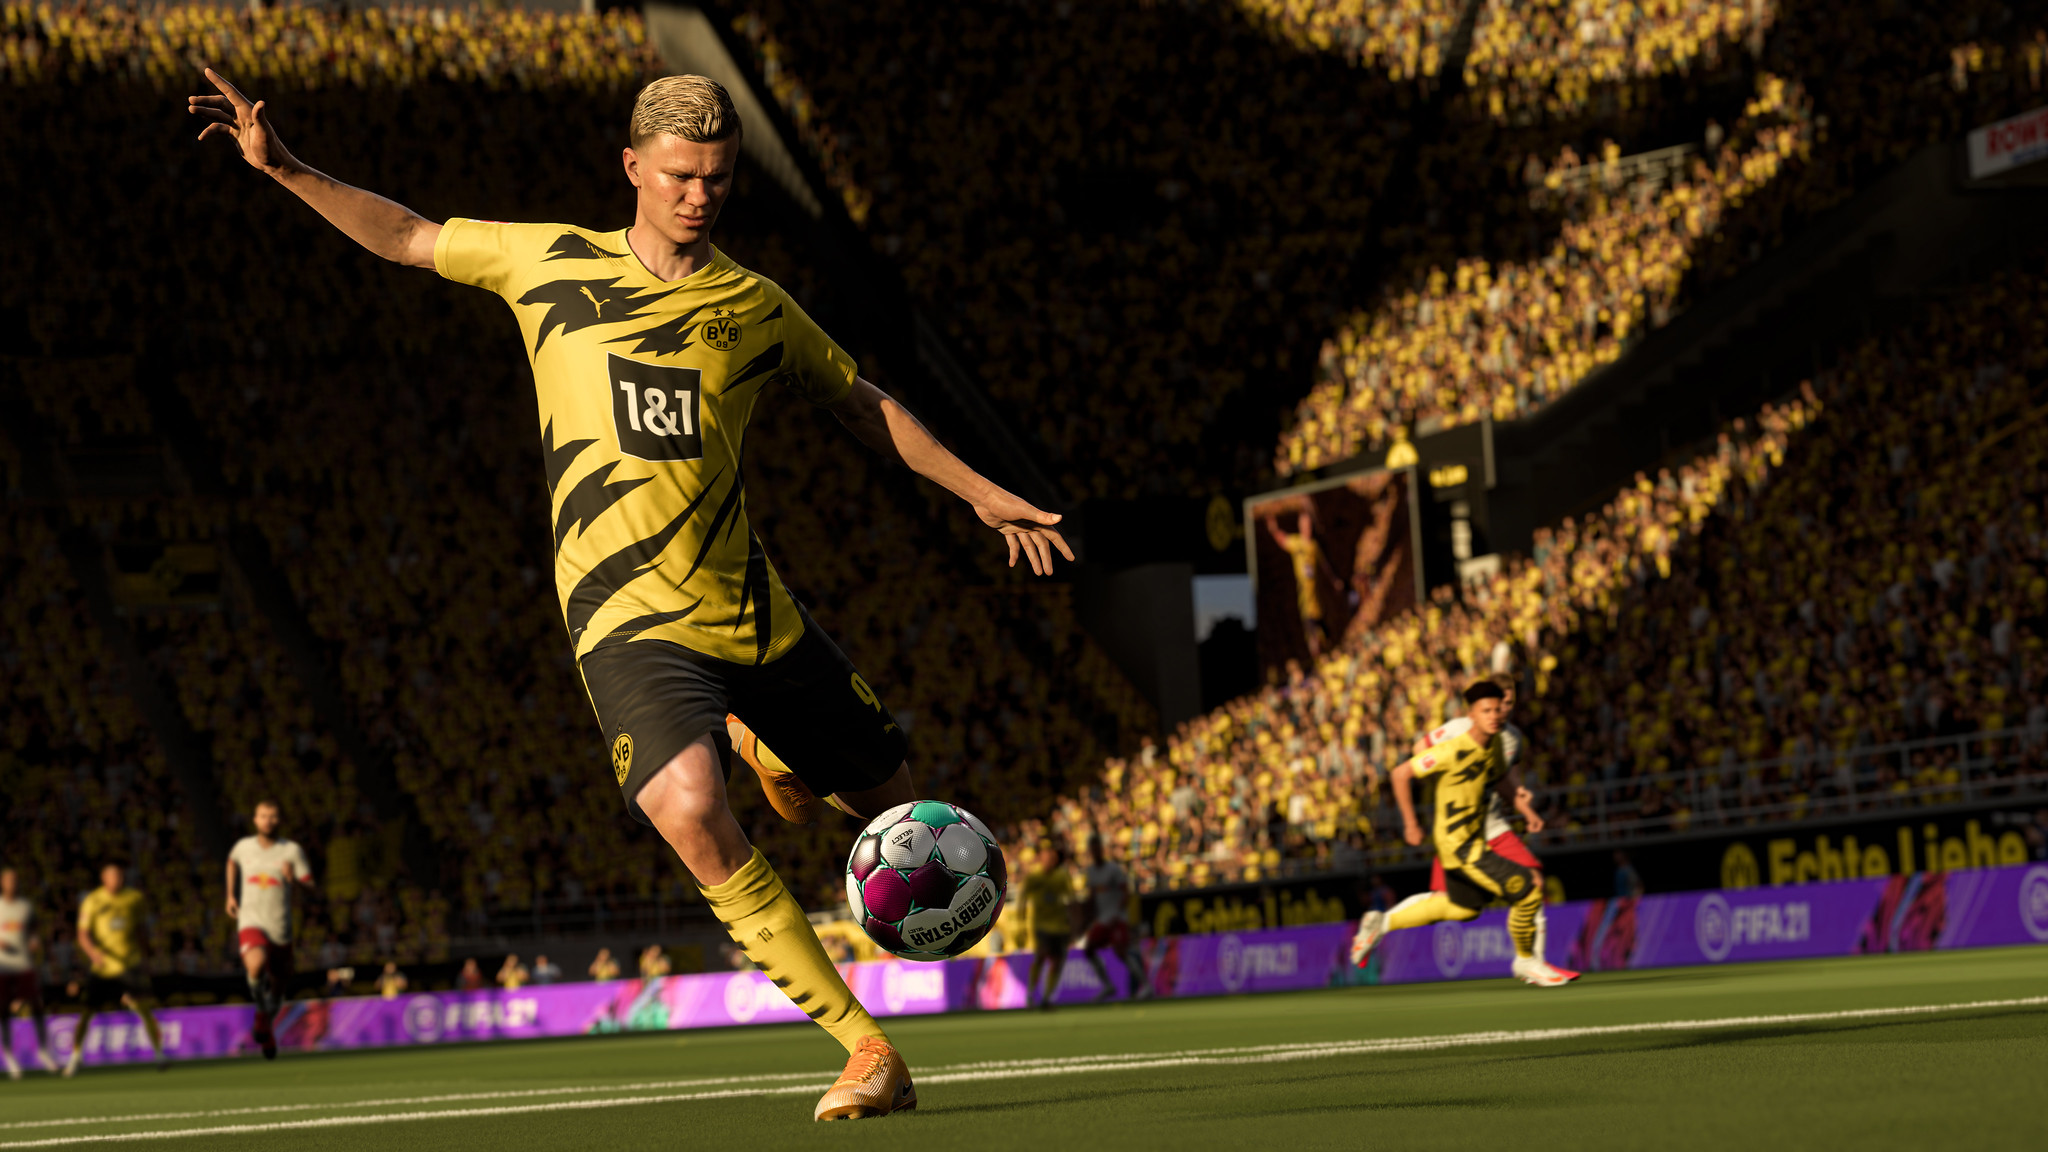 FIFA 21 on PS5 was a port of the past generation with improved graphics